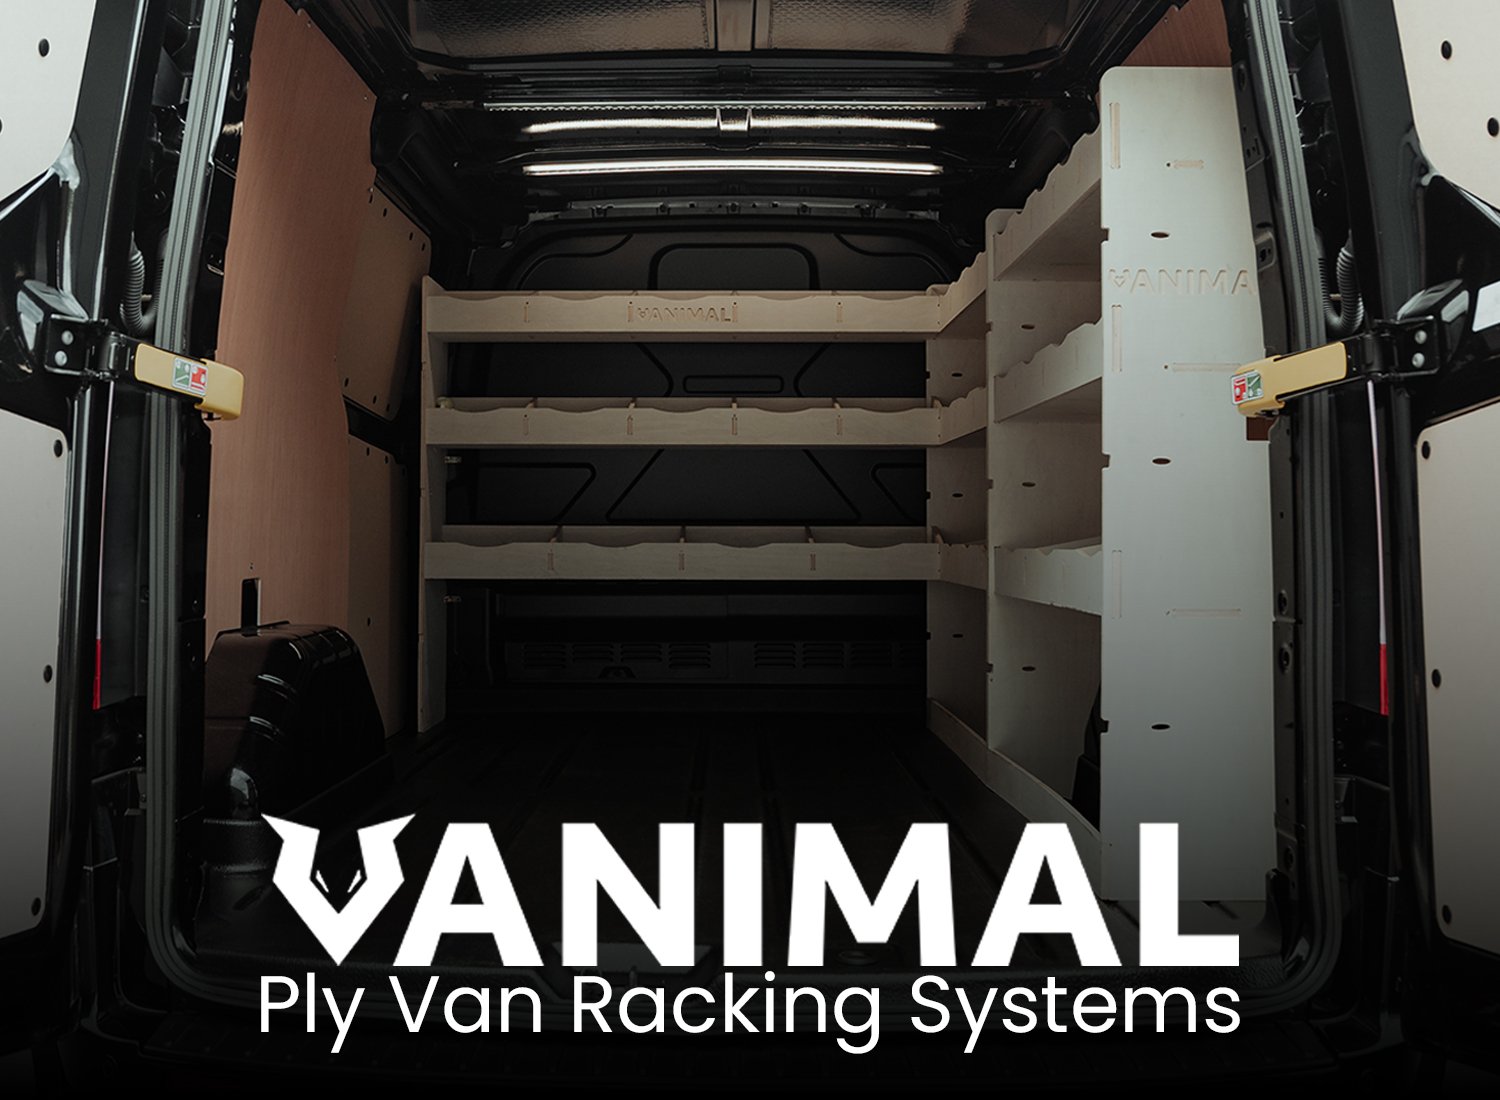 Revolutionise Your Mobile Workspace with Vanimal Plywood Racking